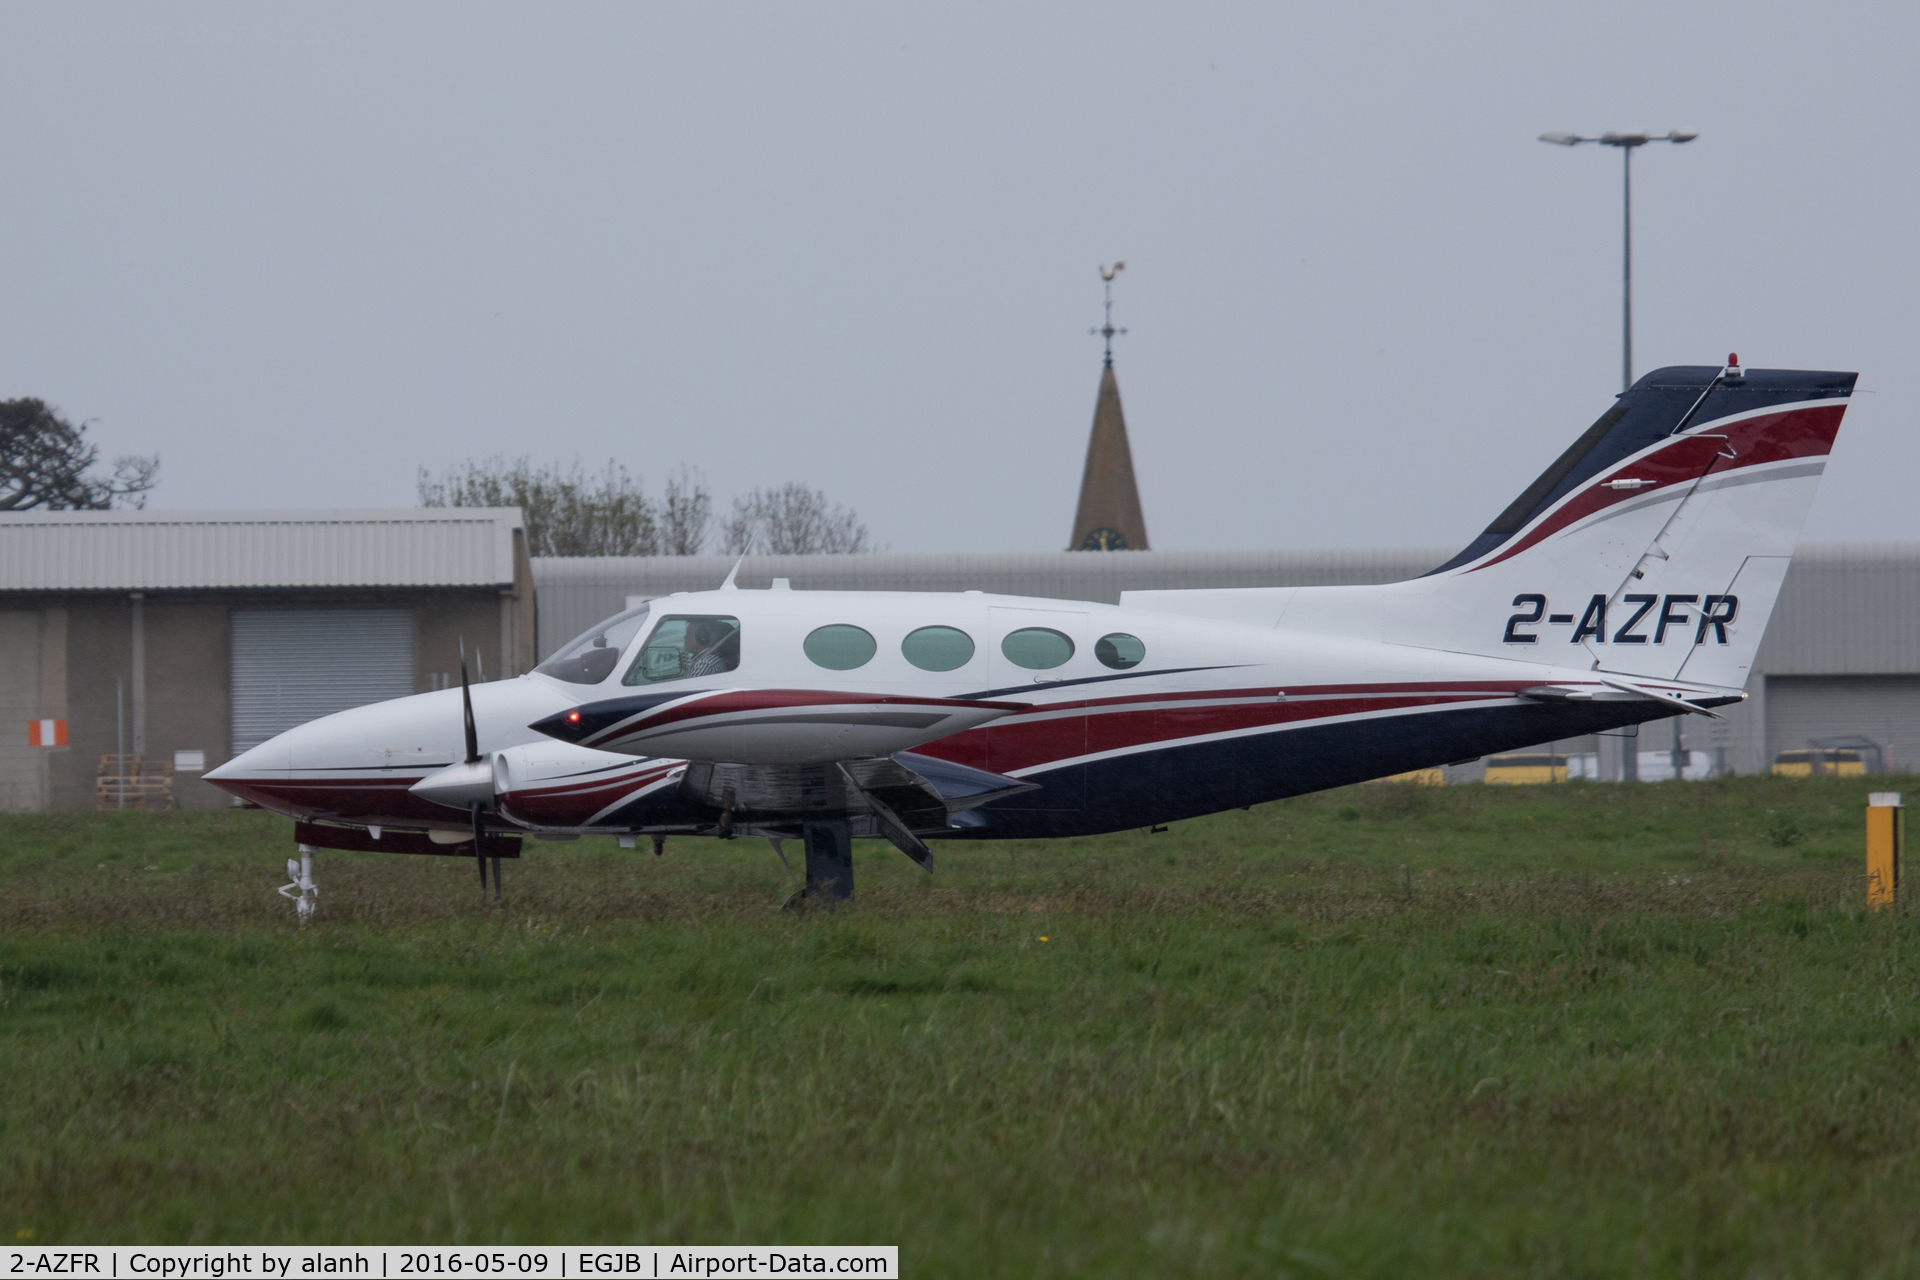 2-AZFR, 1971 Cessna 401B C/N 401B-0121, Arriving at Guernsey in the rain